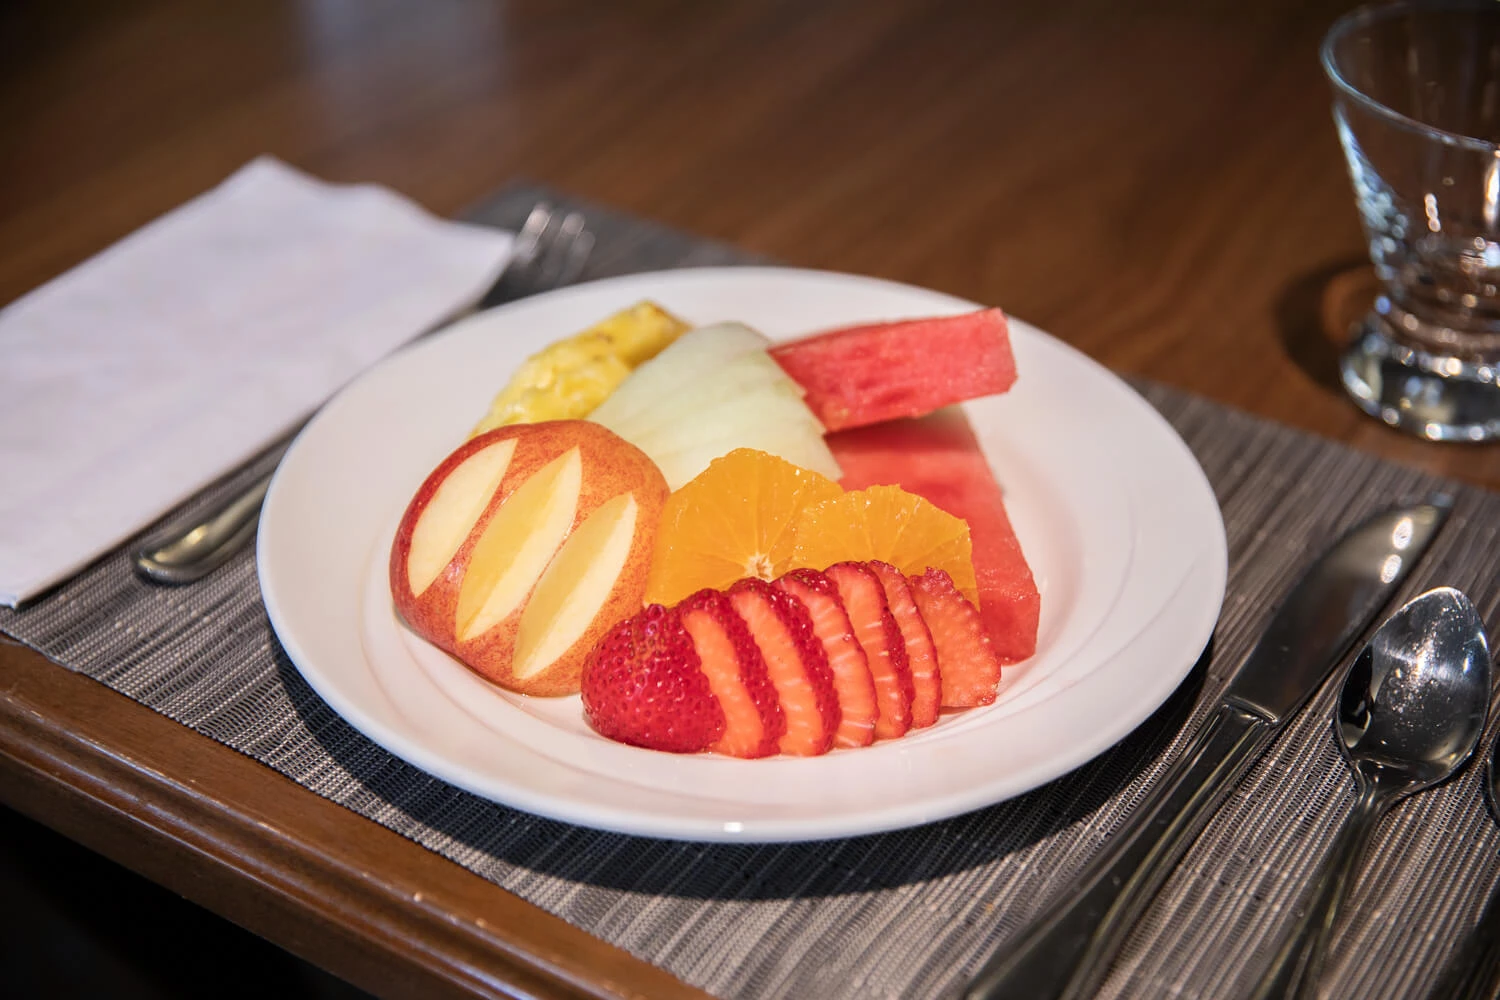 Plate of nicely cut fruit salad